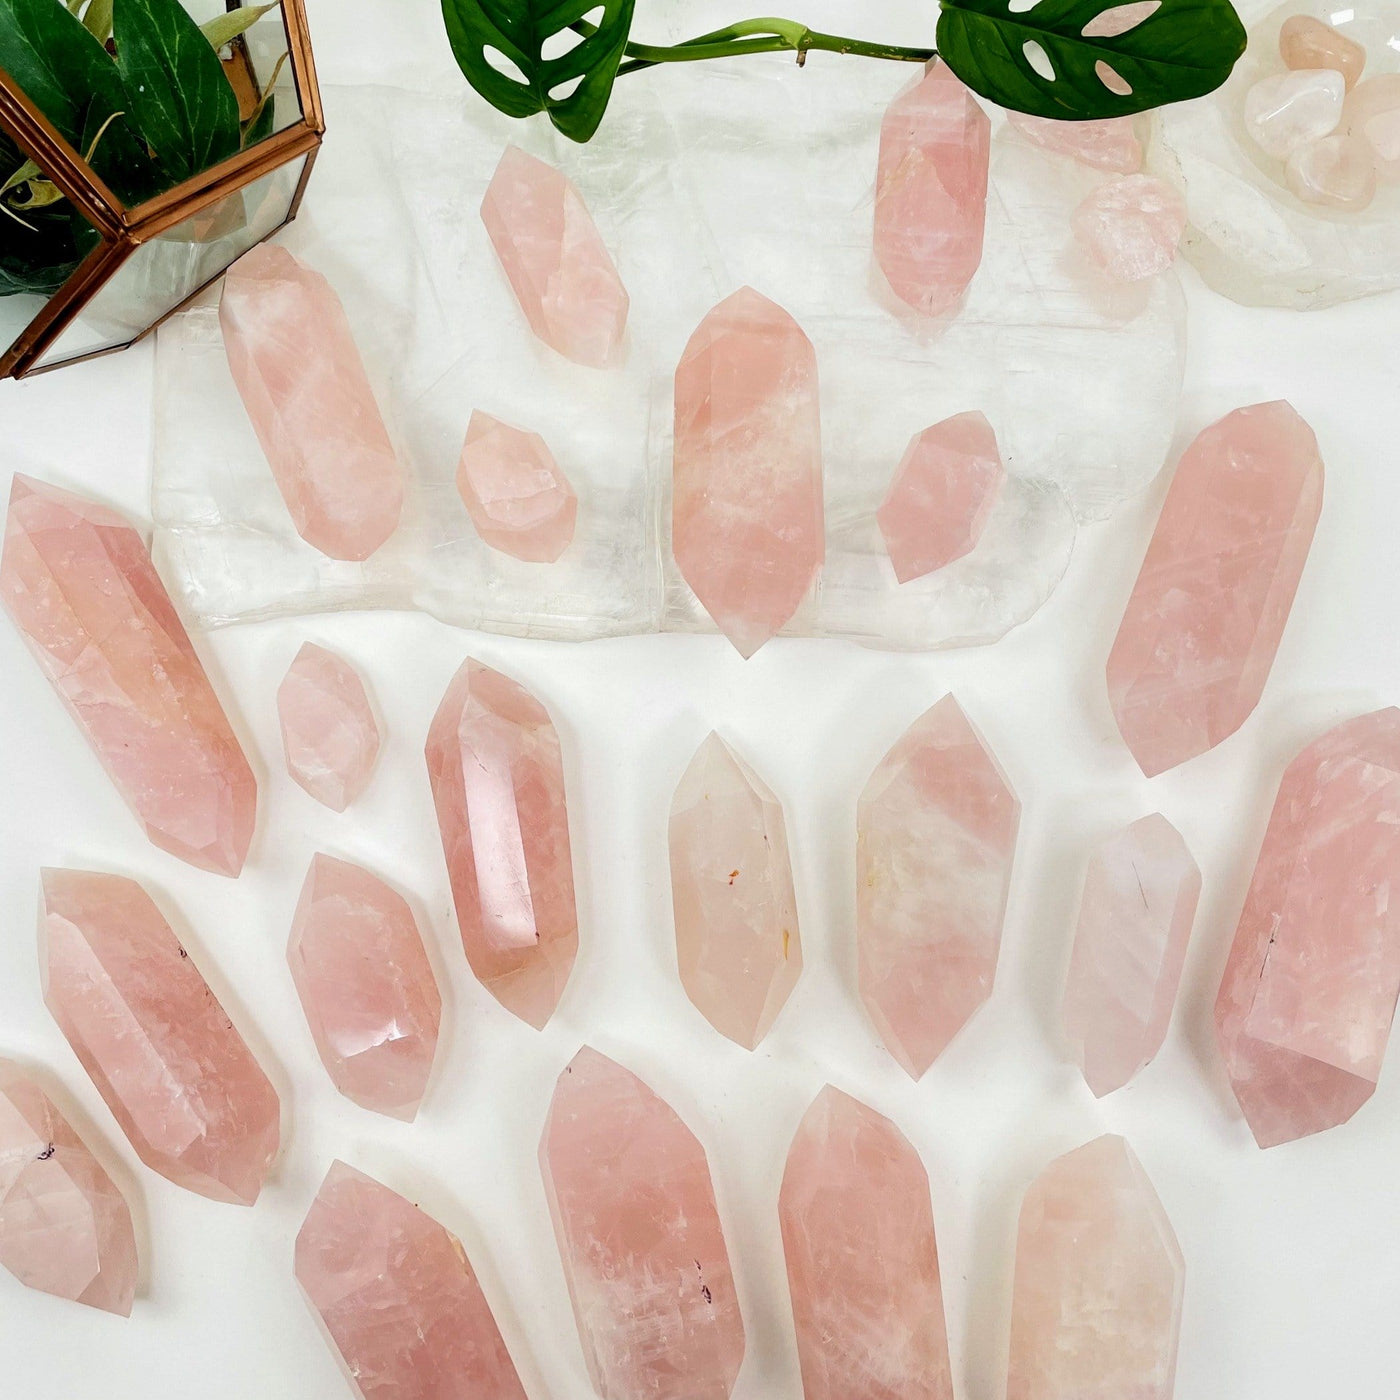 Rose Quartz Double Terminated Points scattered on white background with plants